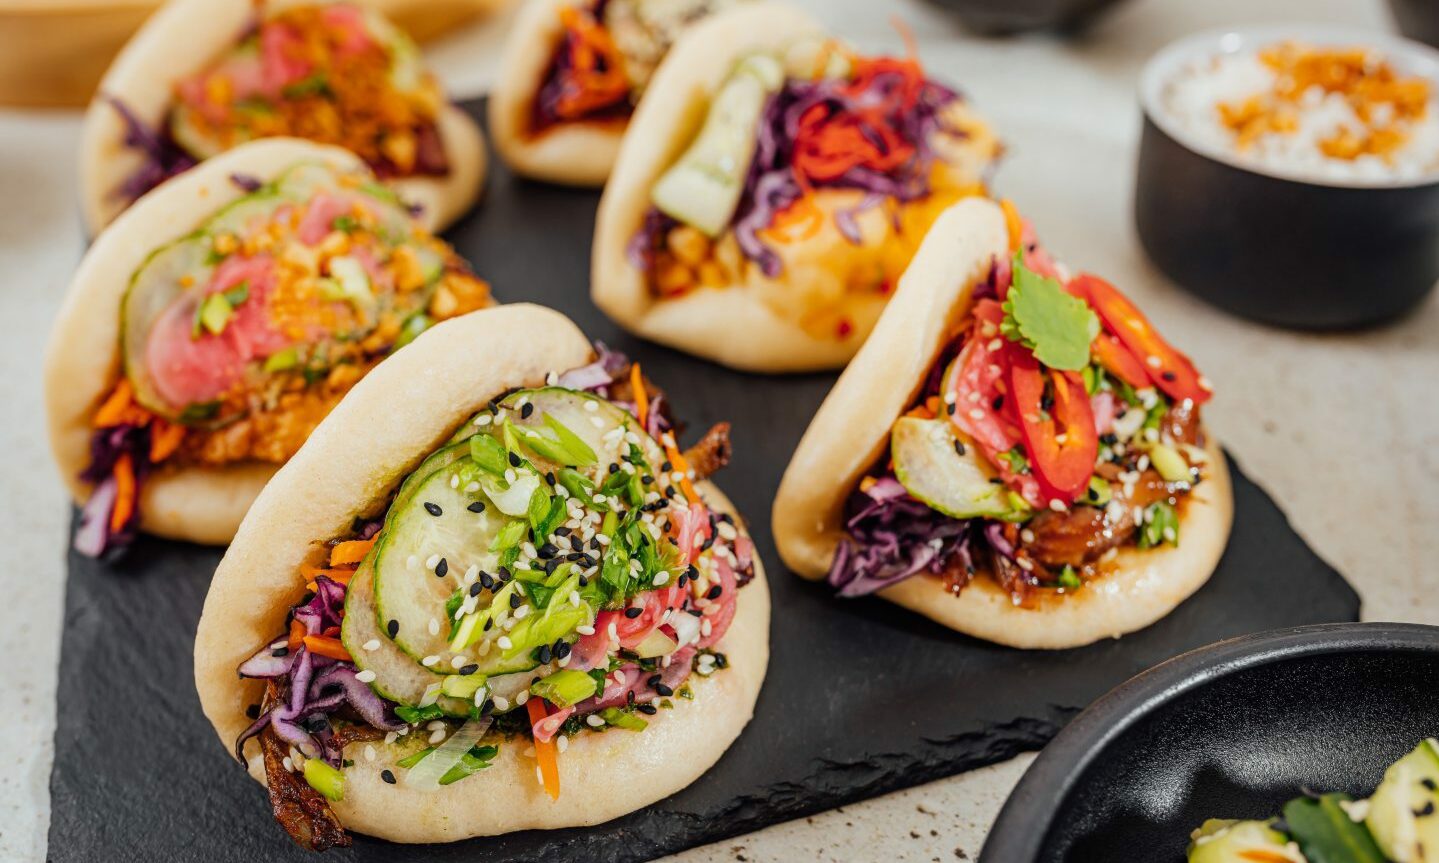 Bao buns galore at this new Cove Bay delivery kitchen.